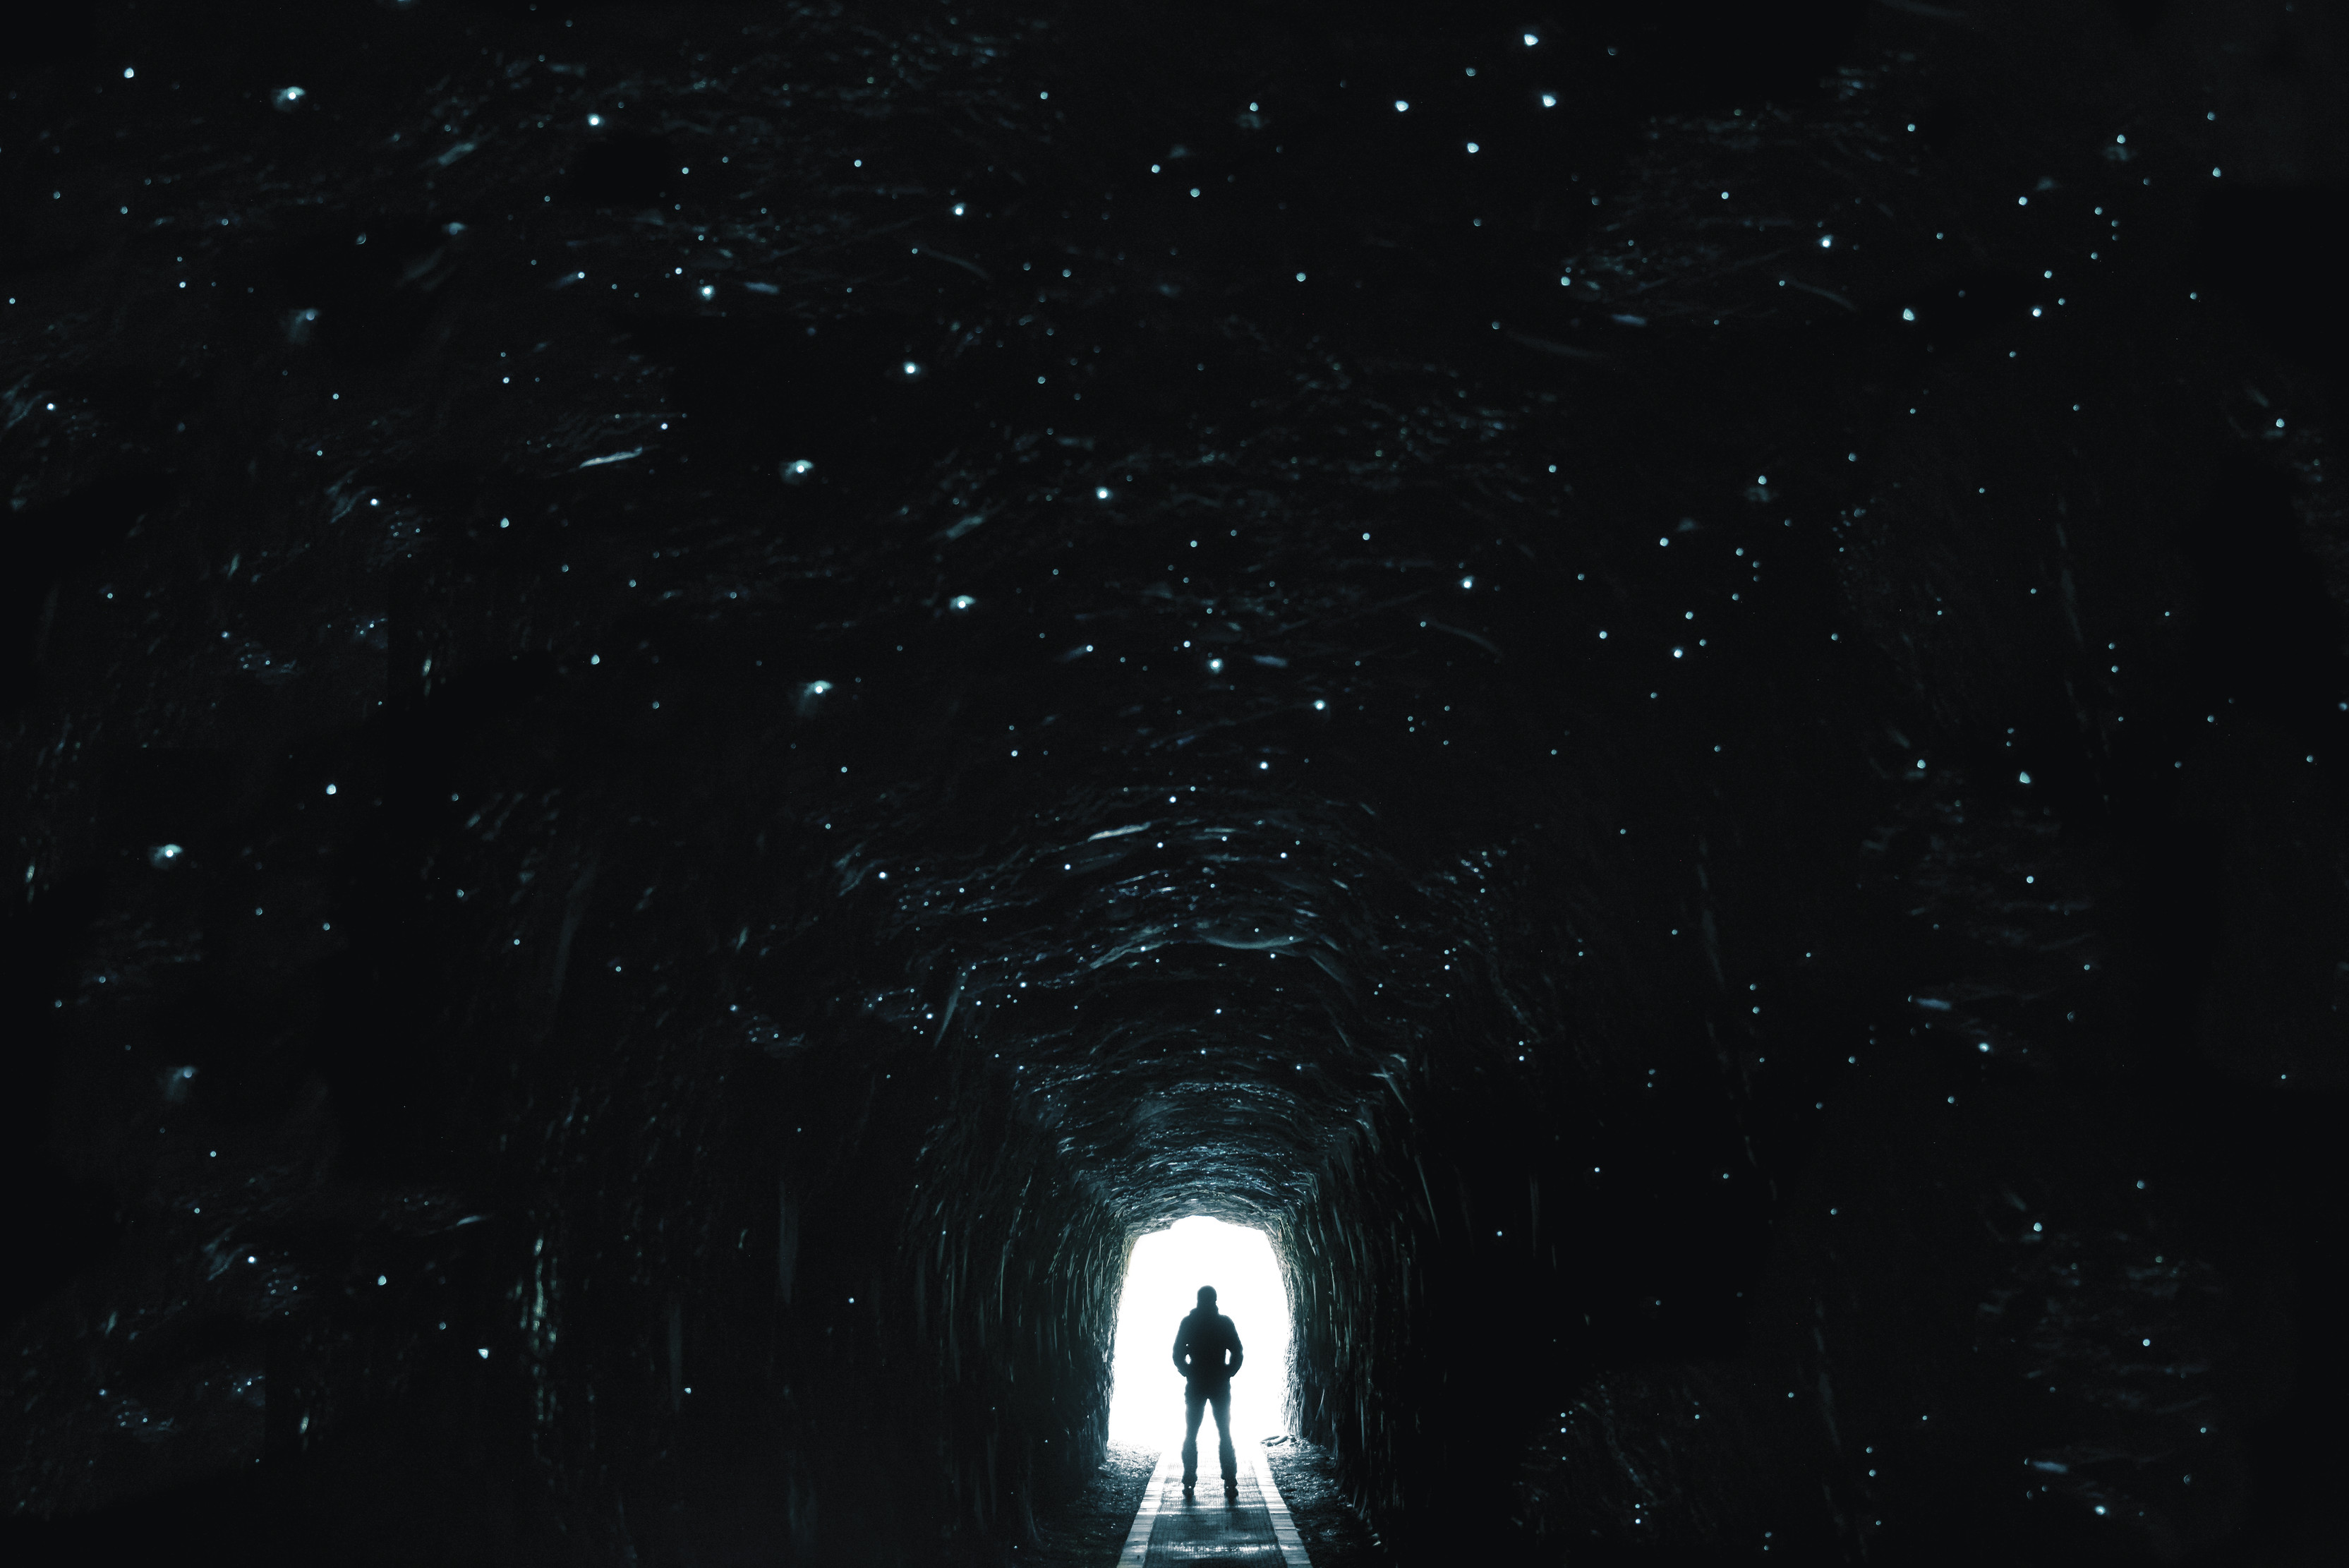 Incredible image take from within the Spray tunnel of a person at the end of the tunnel with vibrant blue glow-worms surrounding the entire tunnel.